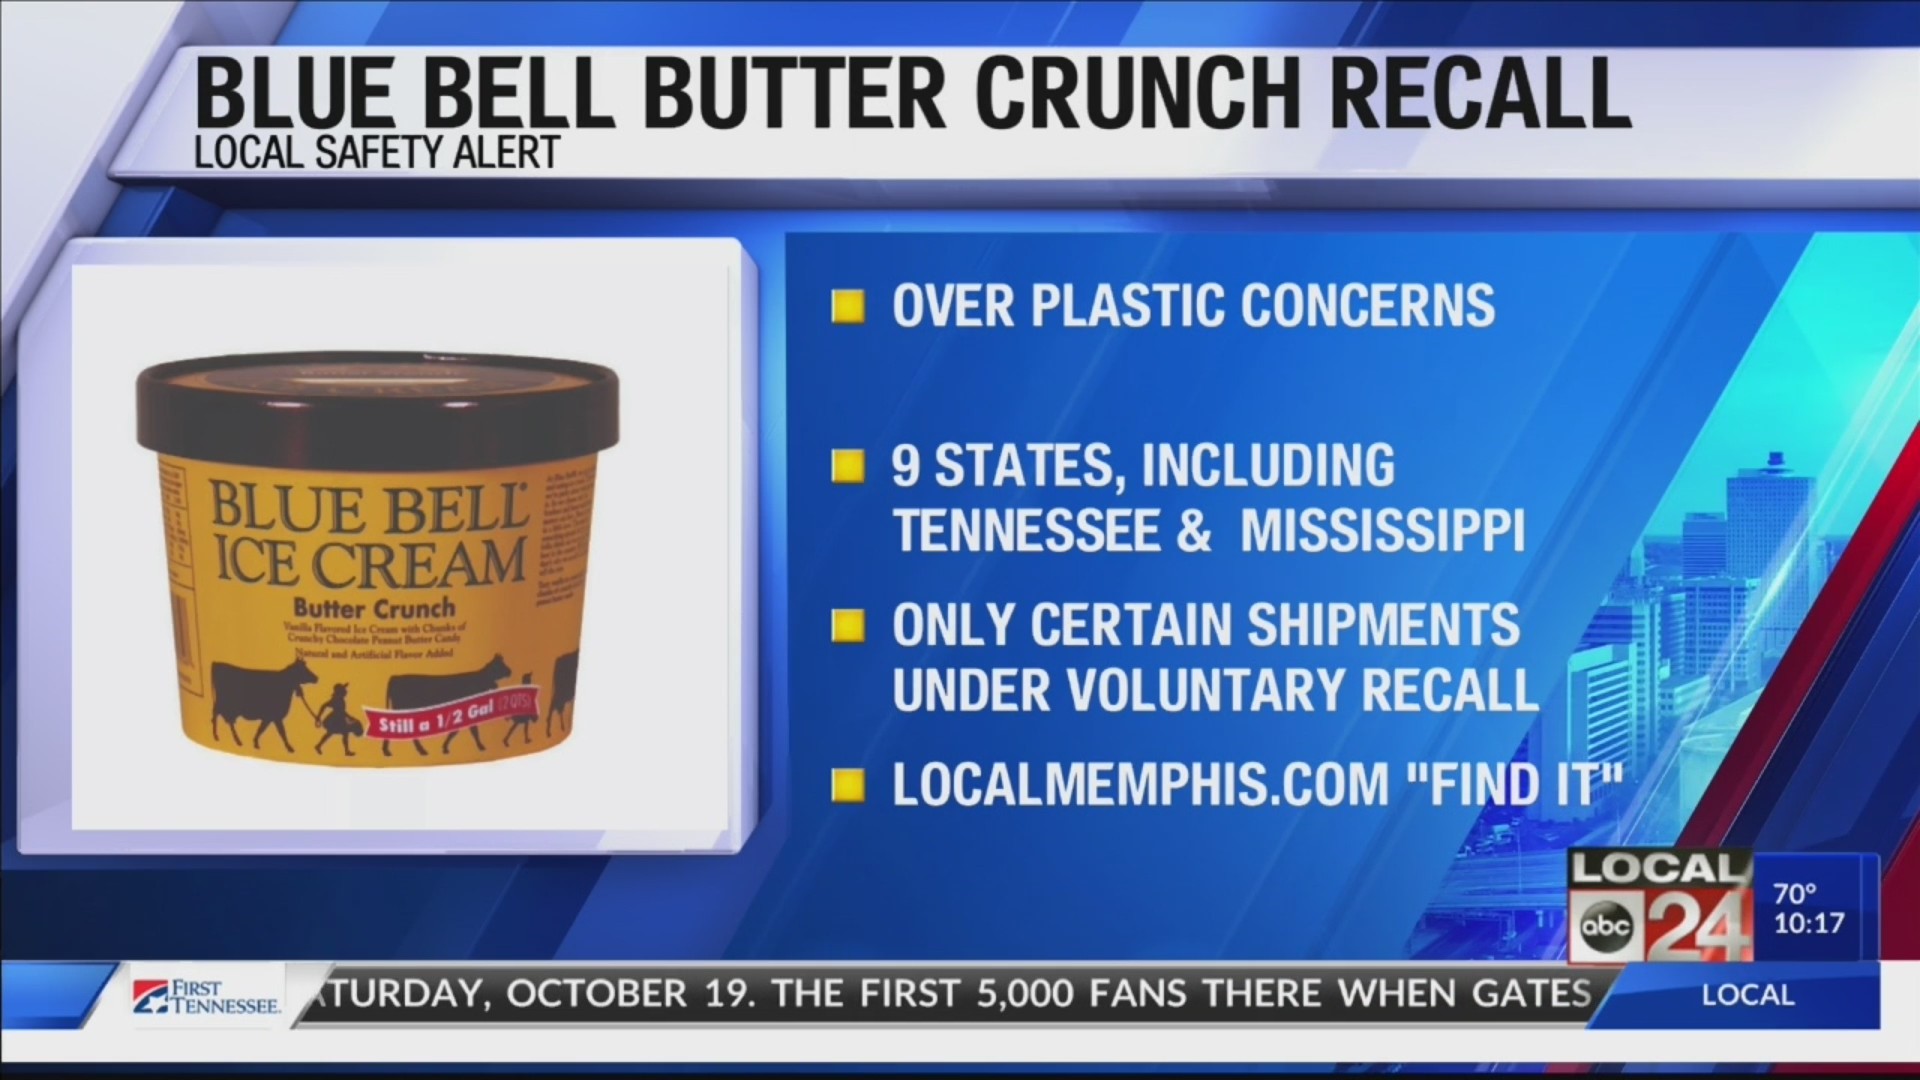 Blue Bell recalls some half-gallons of Butter Crunch Ice Cream due to possible plastic